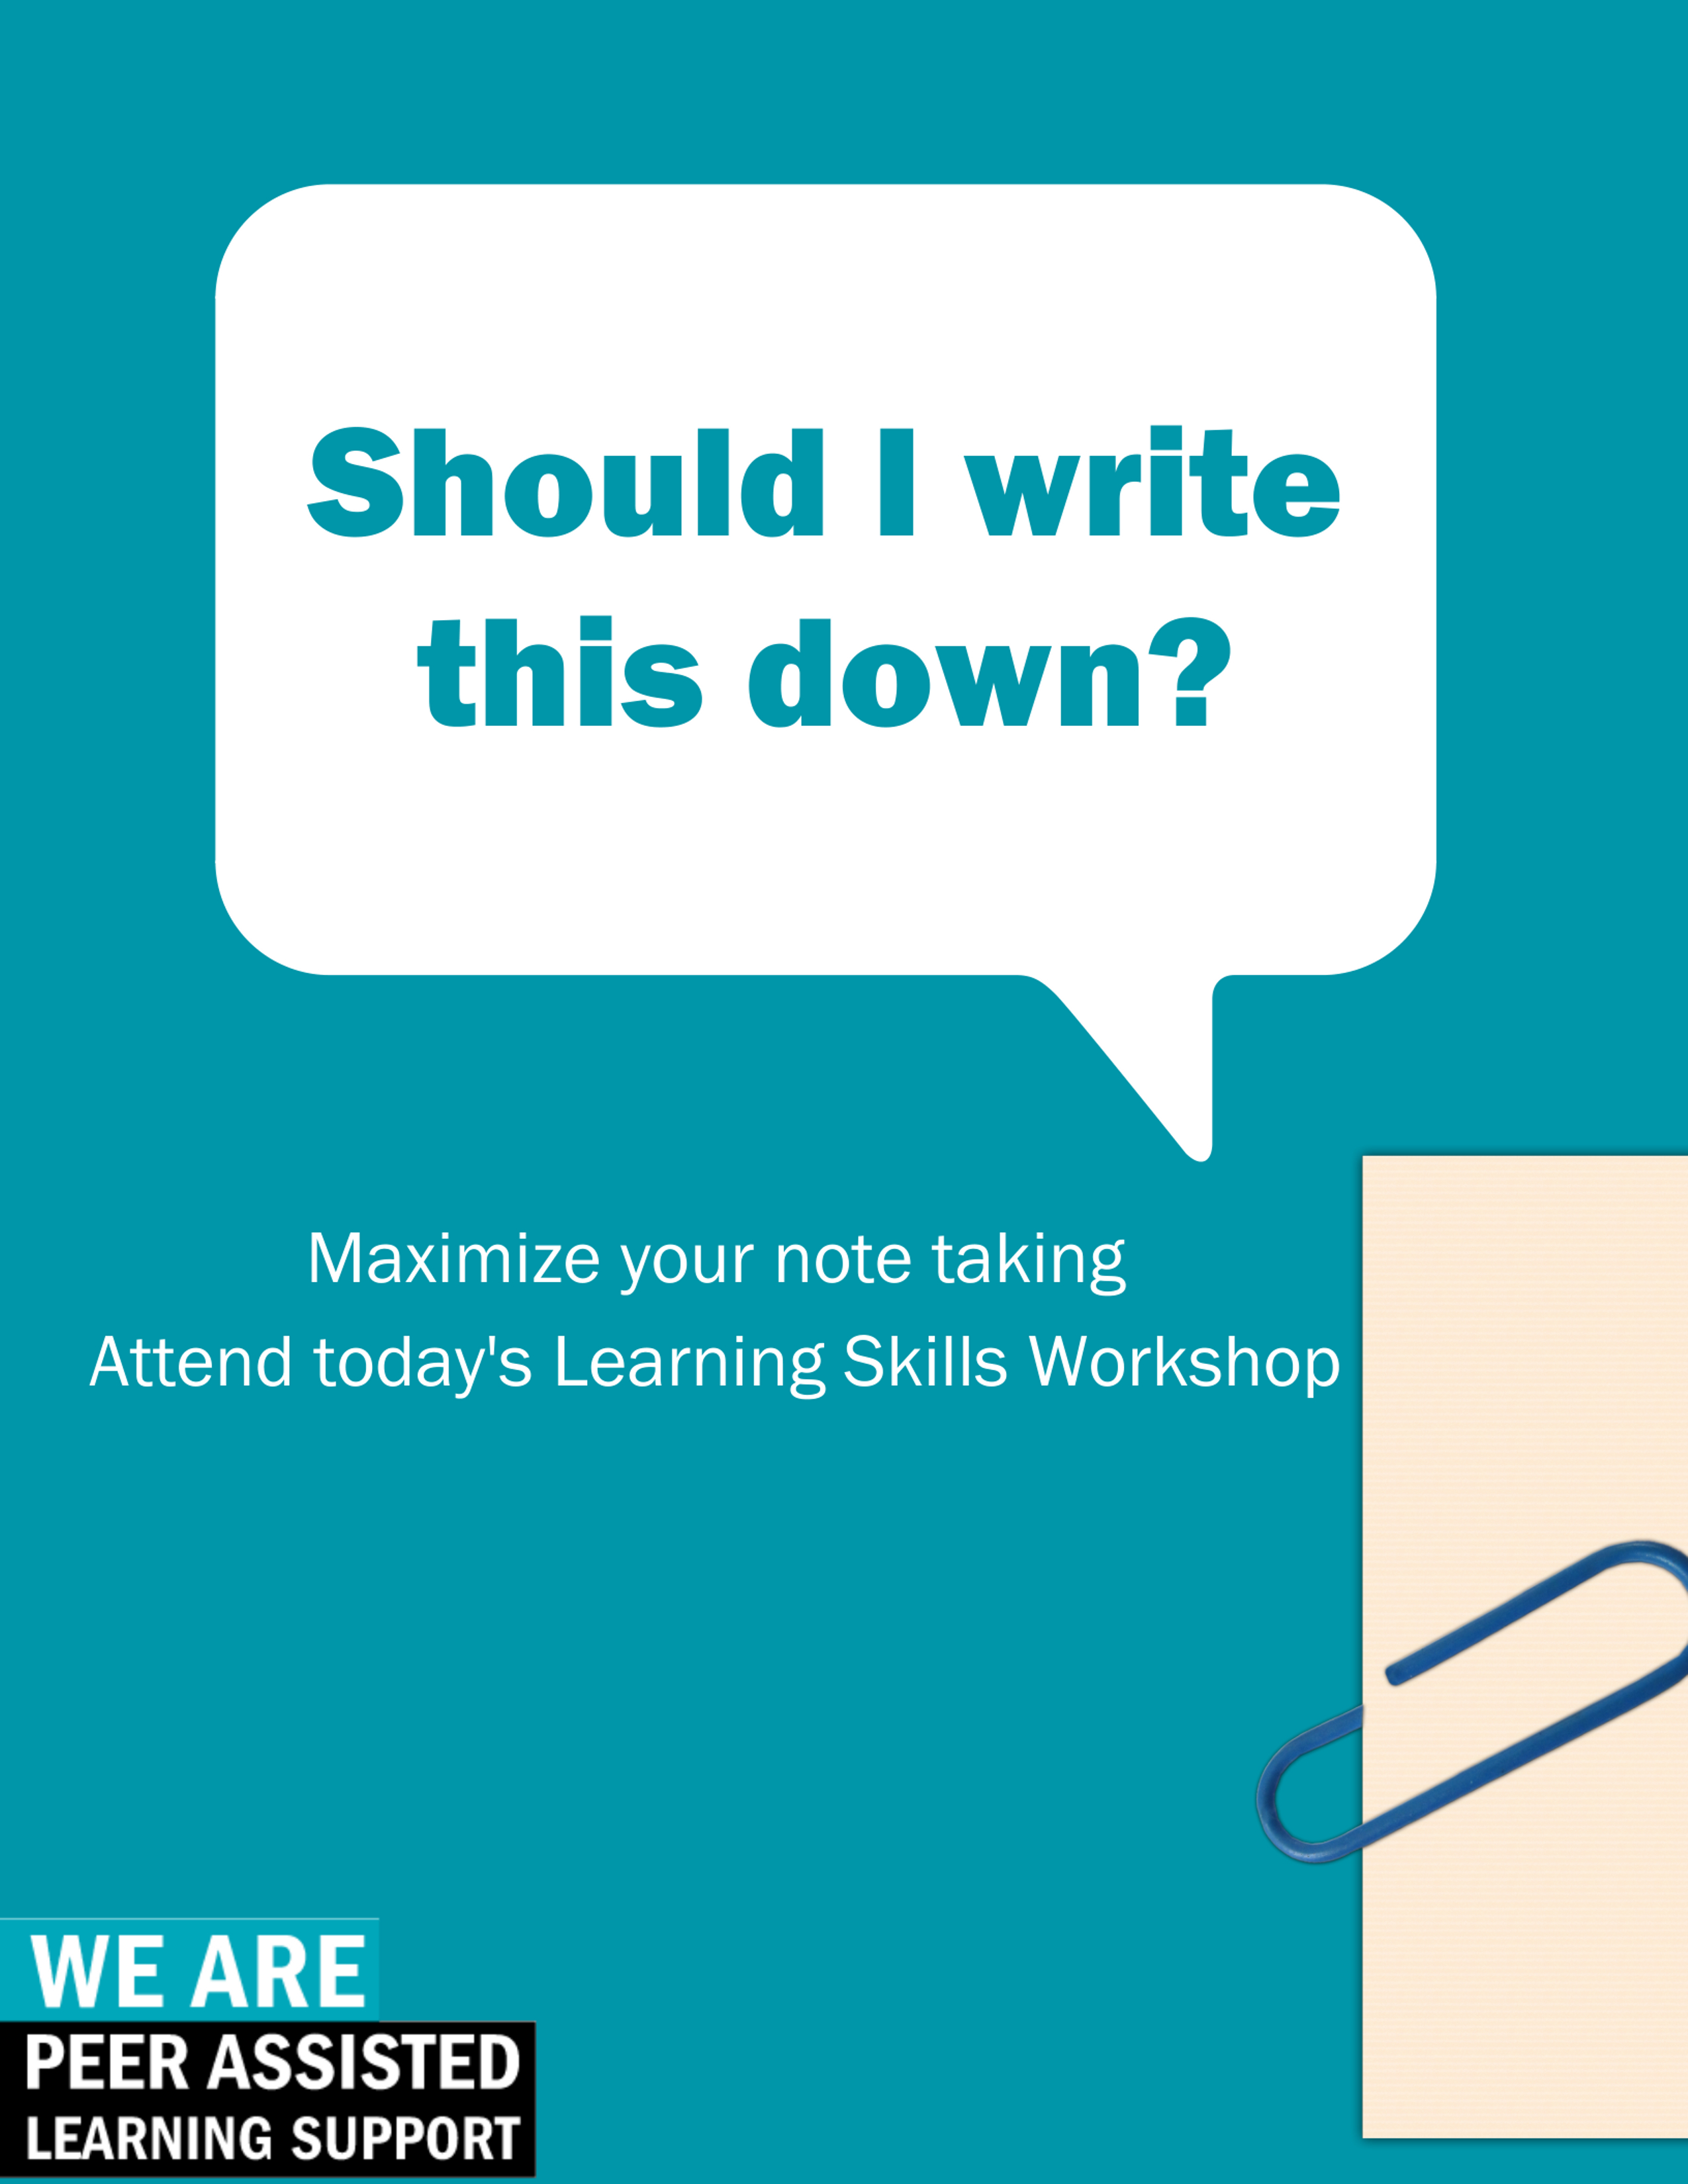 A piece of paper with a paperclip on a bright blue background. Background text says “Should I write this down? Maximize your not